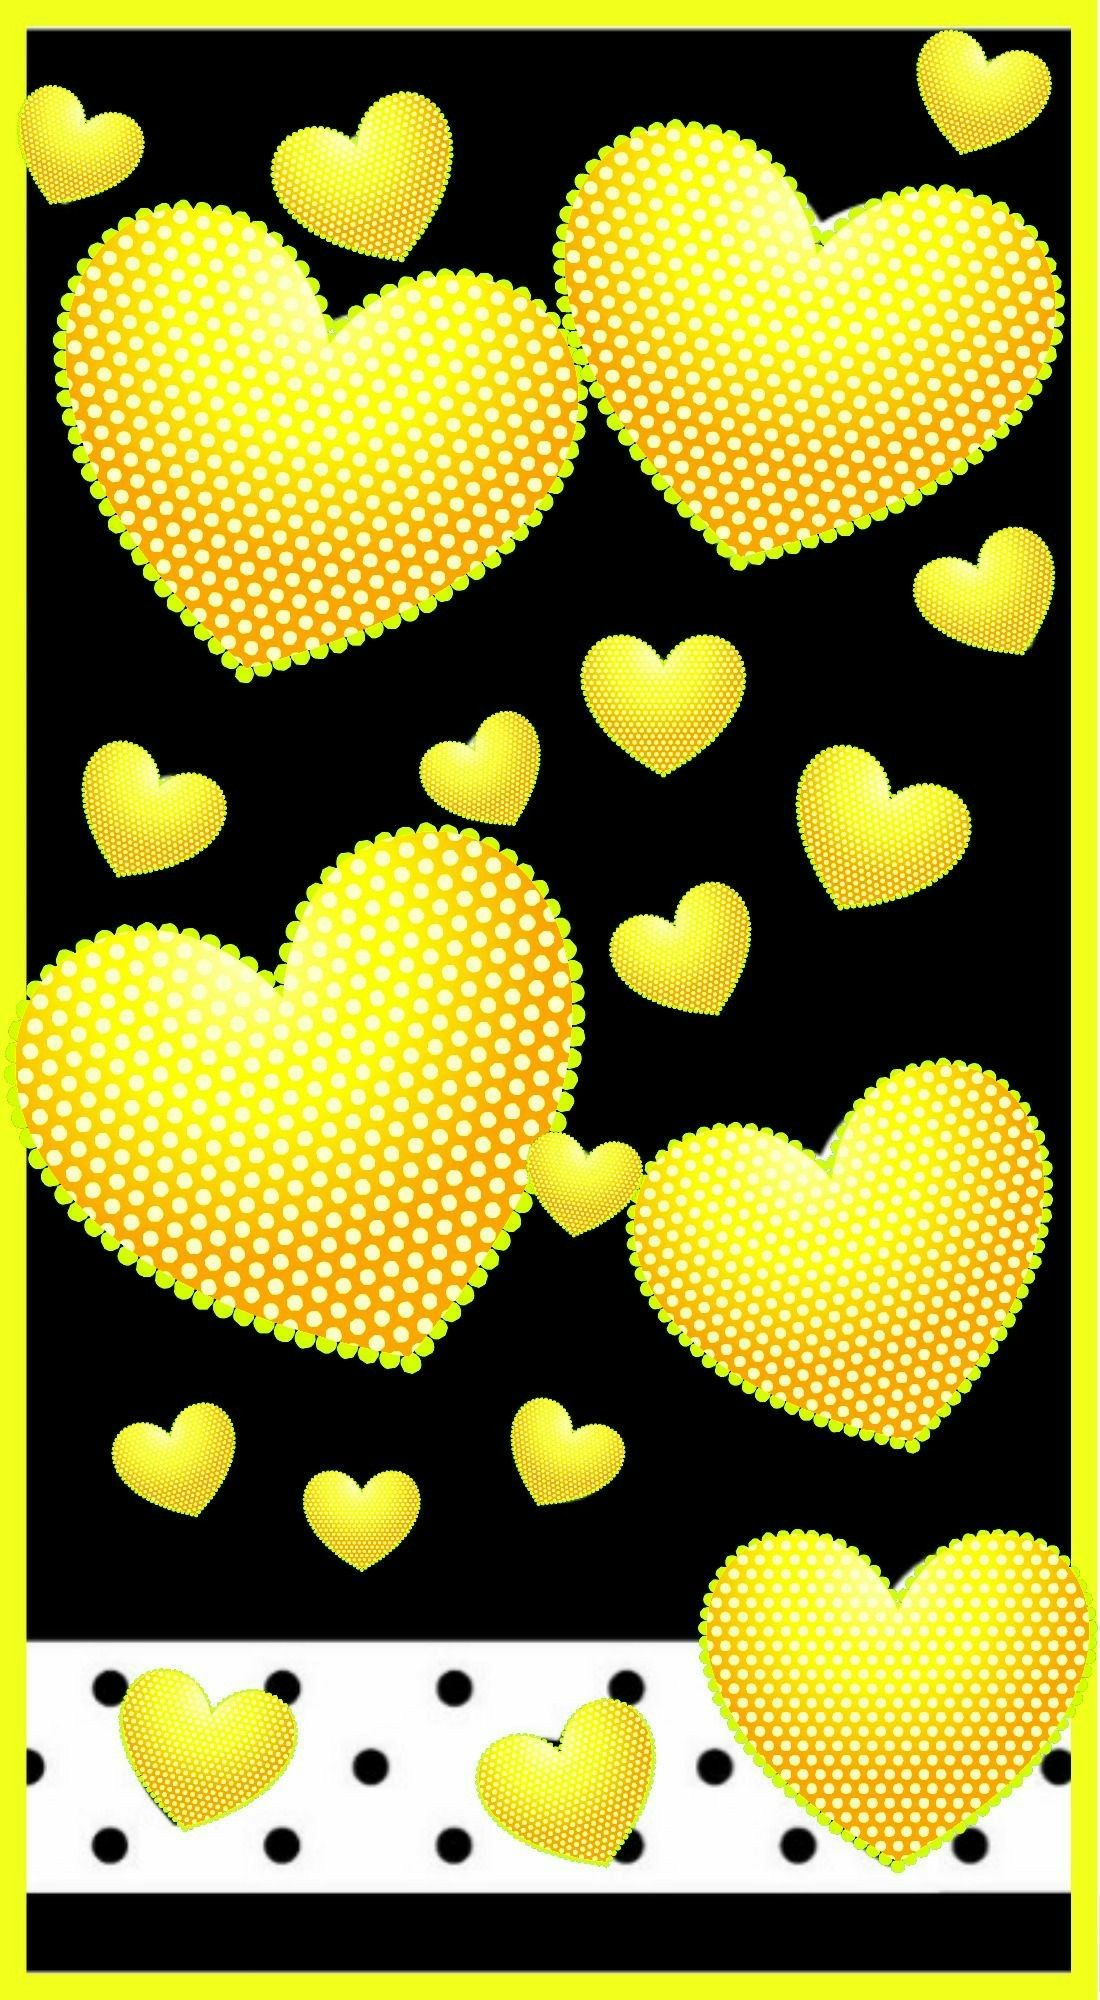 Yellow Hearts Wallpapers